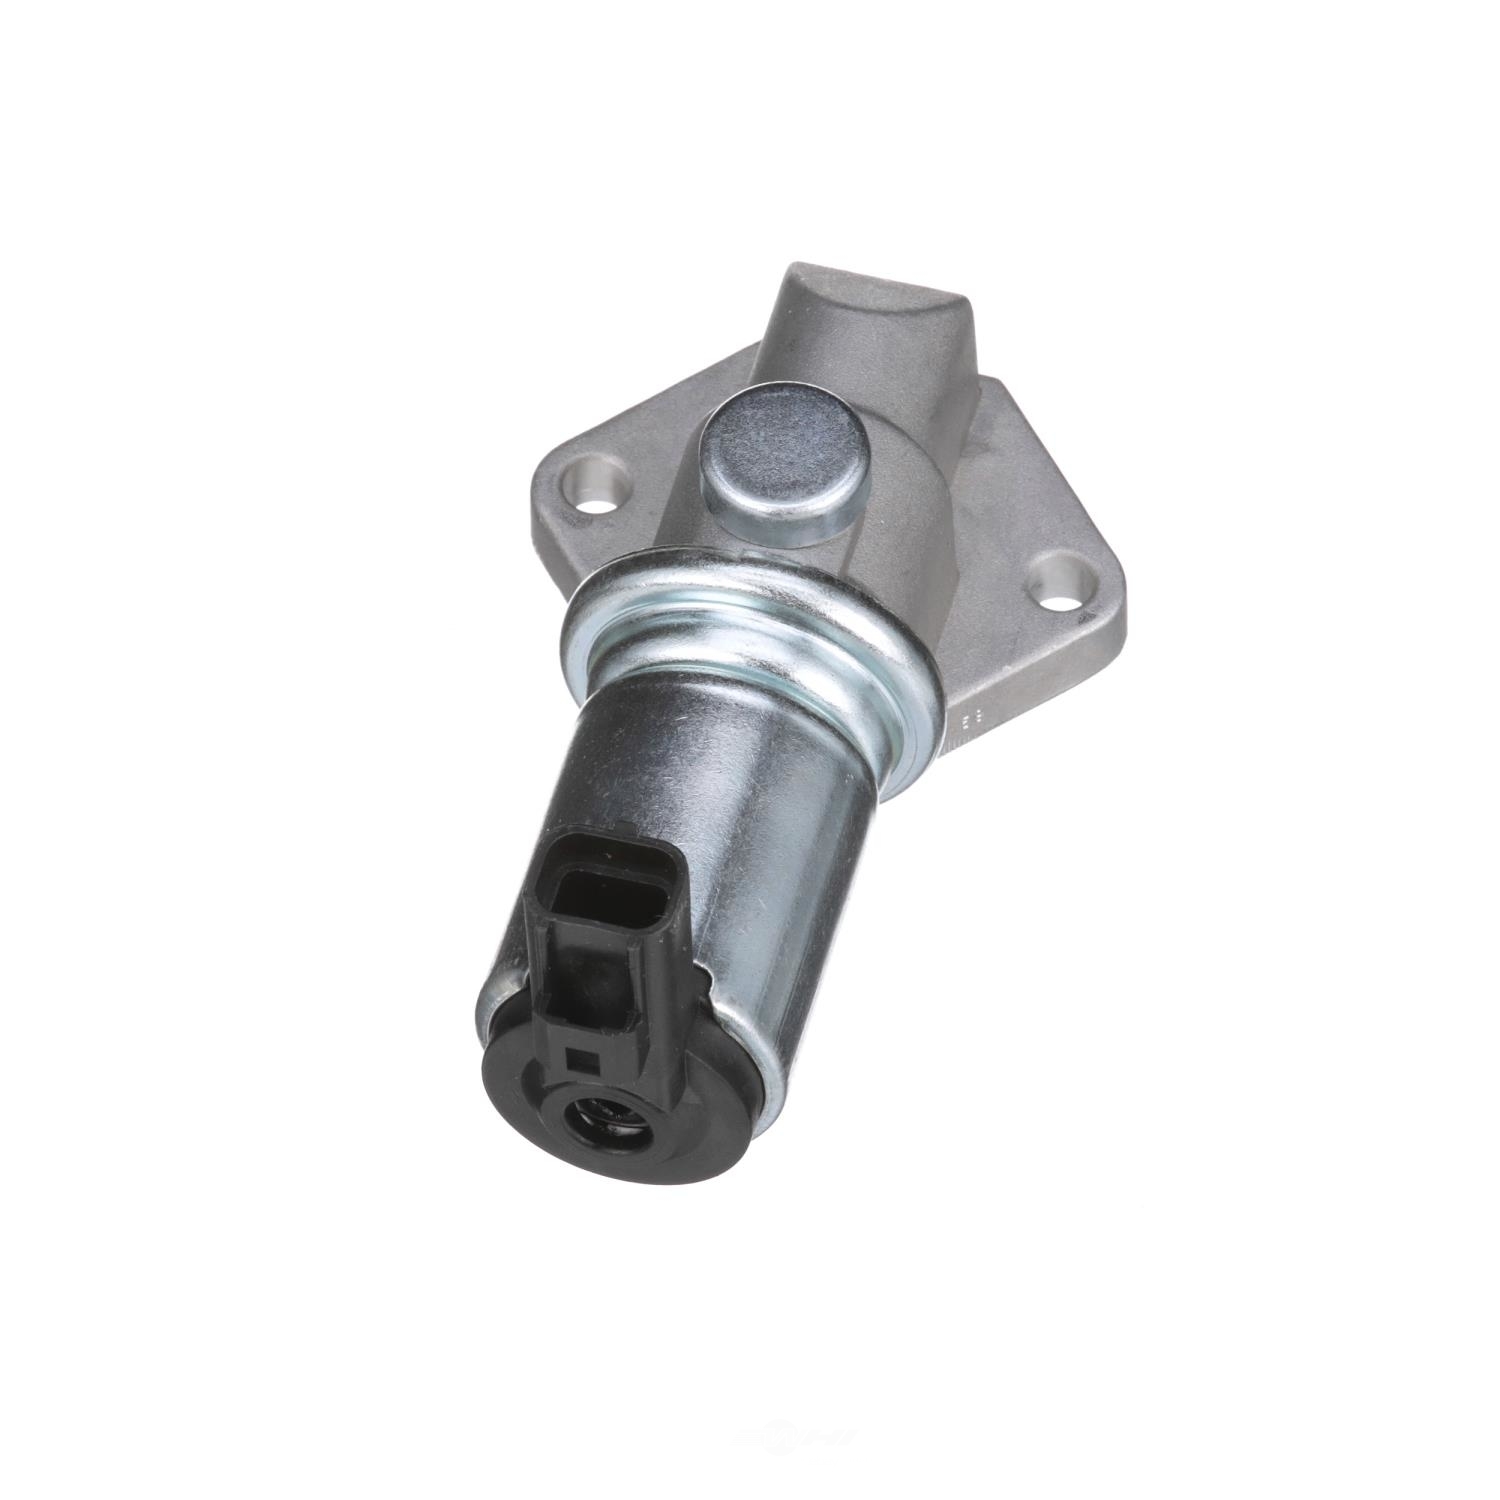 Standard Motor Products AC21 Idle Air Control Valve